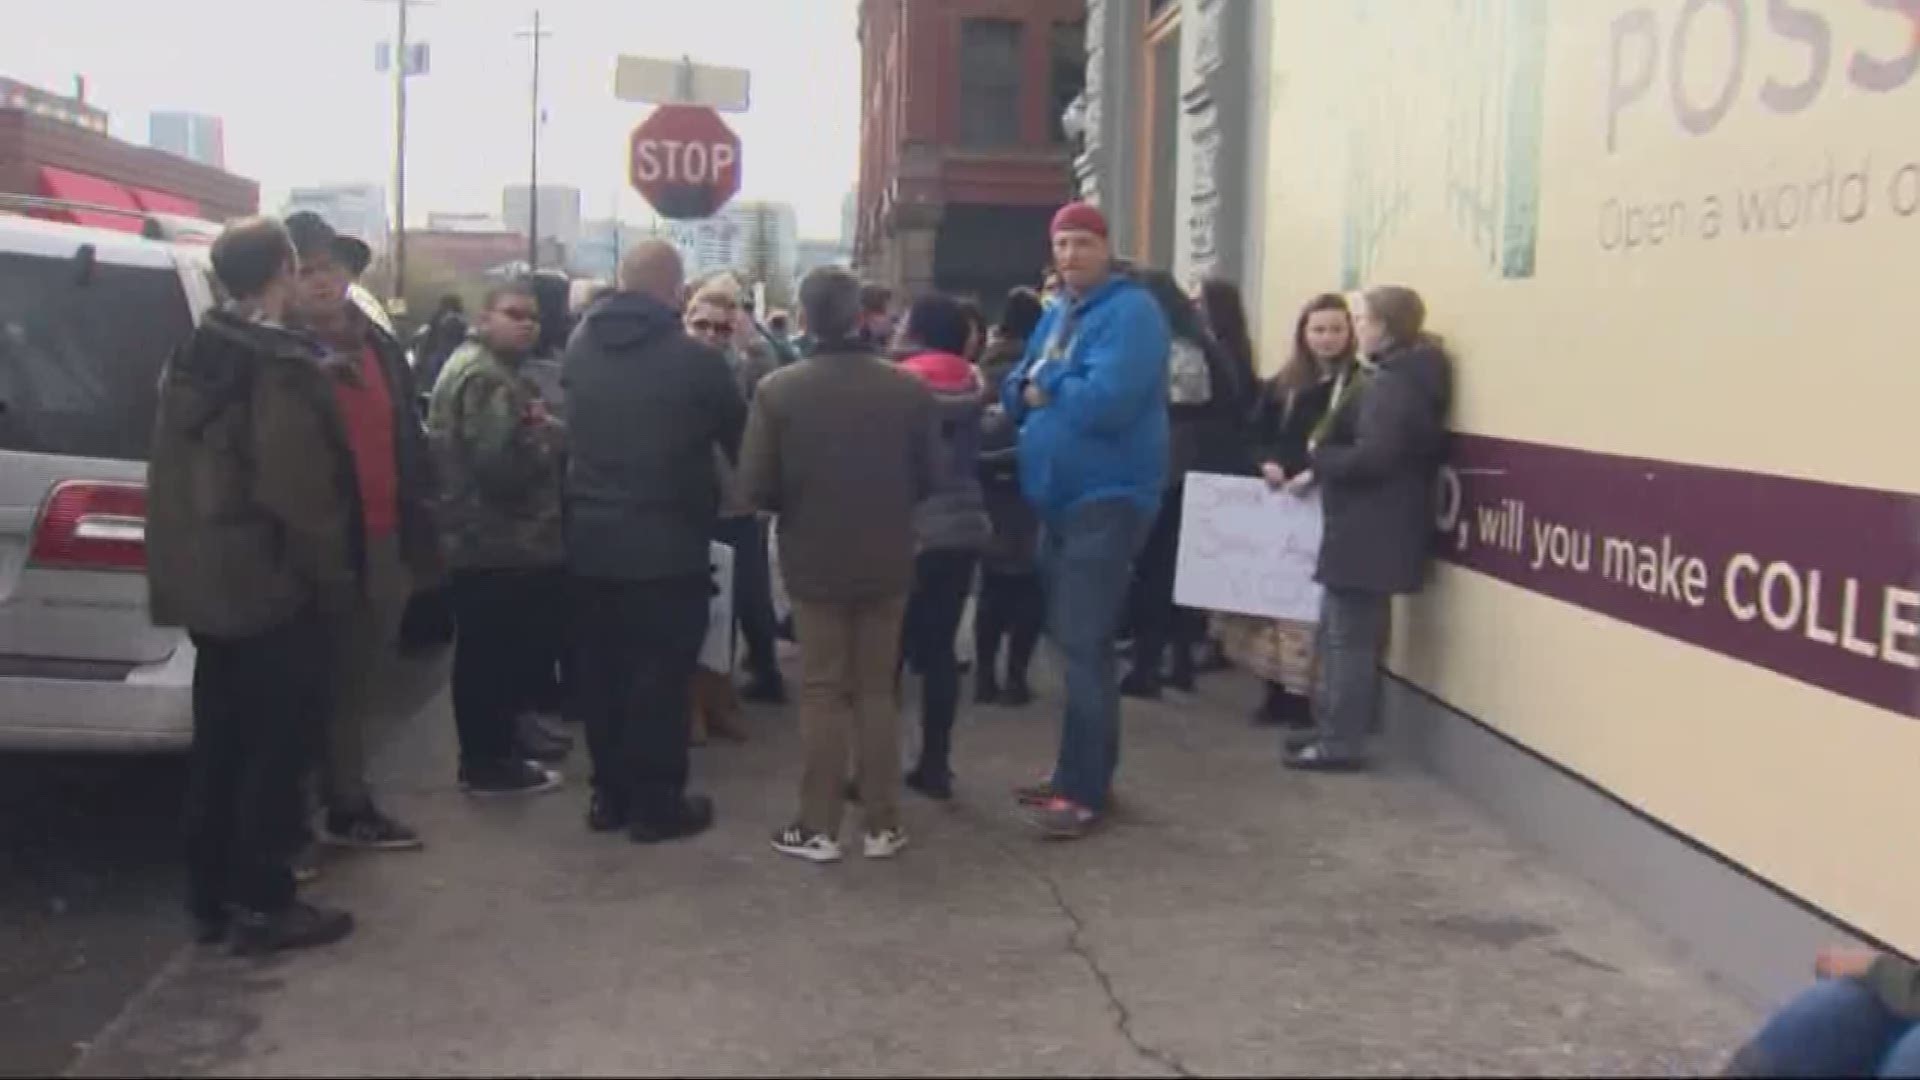 About two dozen took part in a vigil against police violence in SE Portland on Sunday after a carjacking suspect was shot and killed by Portland police officers.